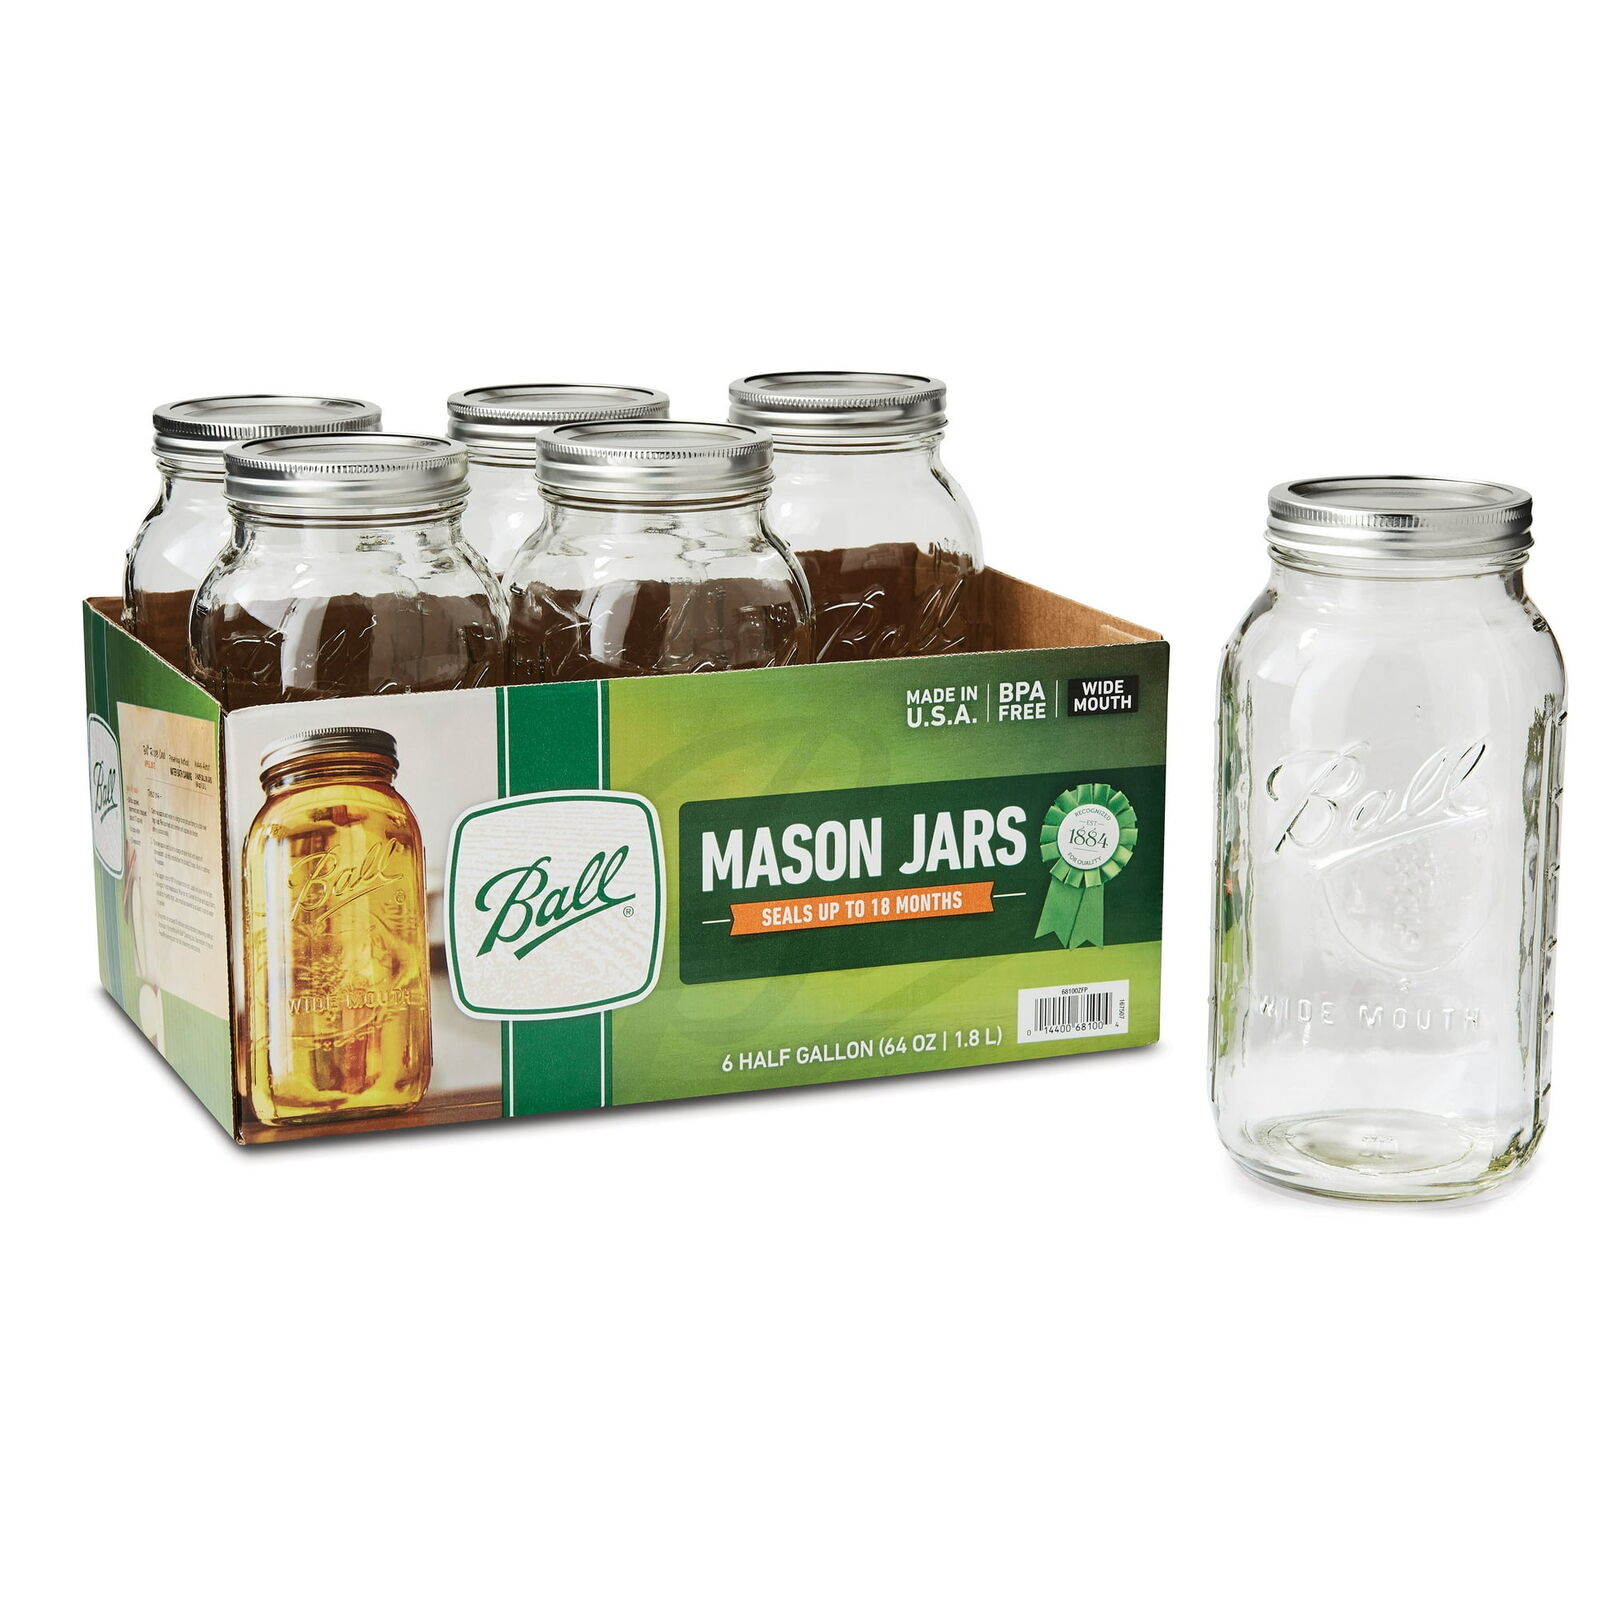 Wide Mouth 64oz Half Gallon Mason Jars with Lids & Bands, 6 Count